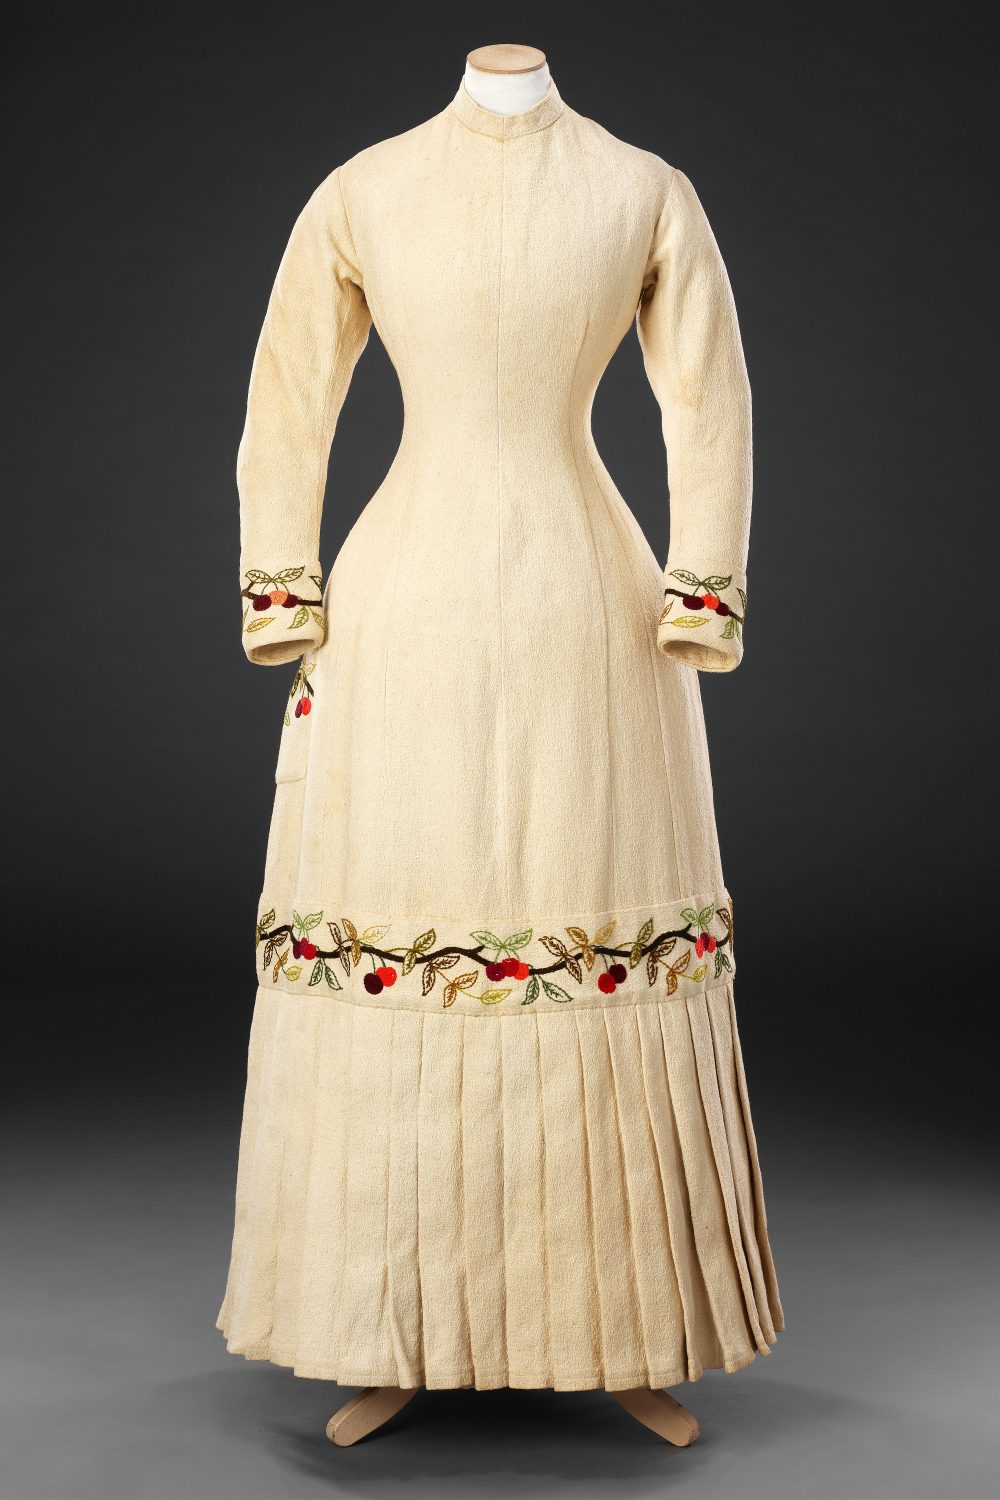 Dress, Circa 1880, Cotton embroidered with wool; mother of pearl buttons, John Bright Collection.jpg